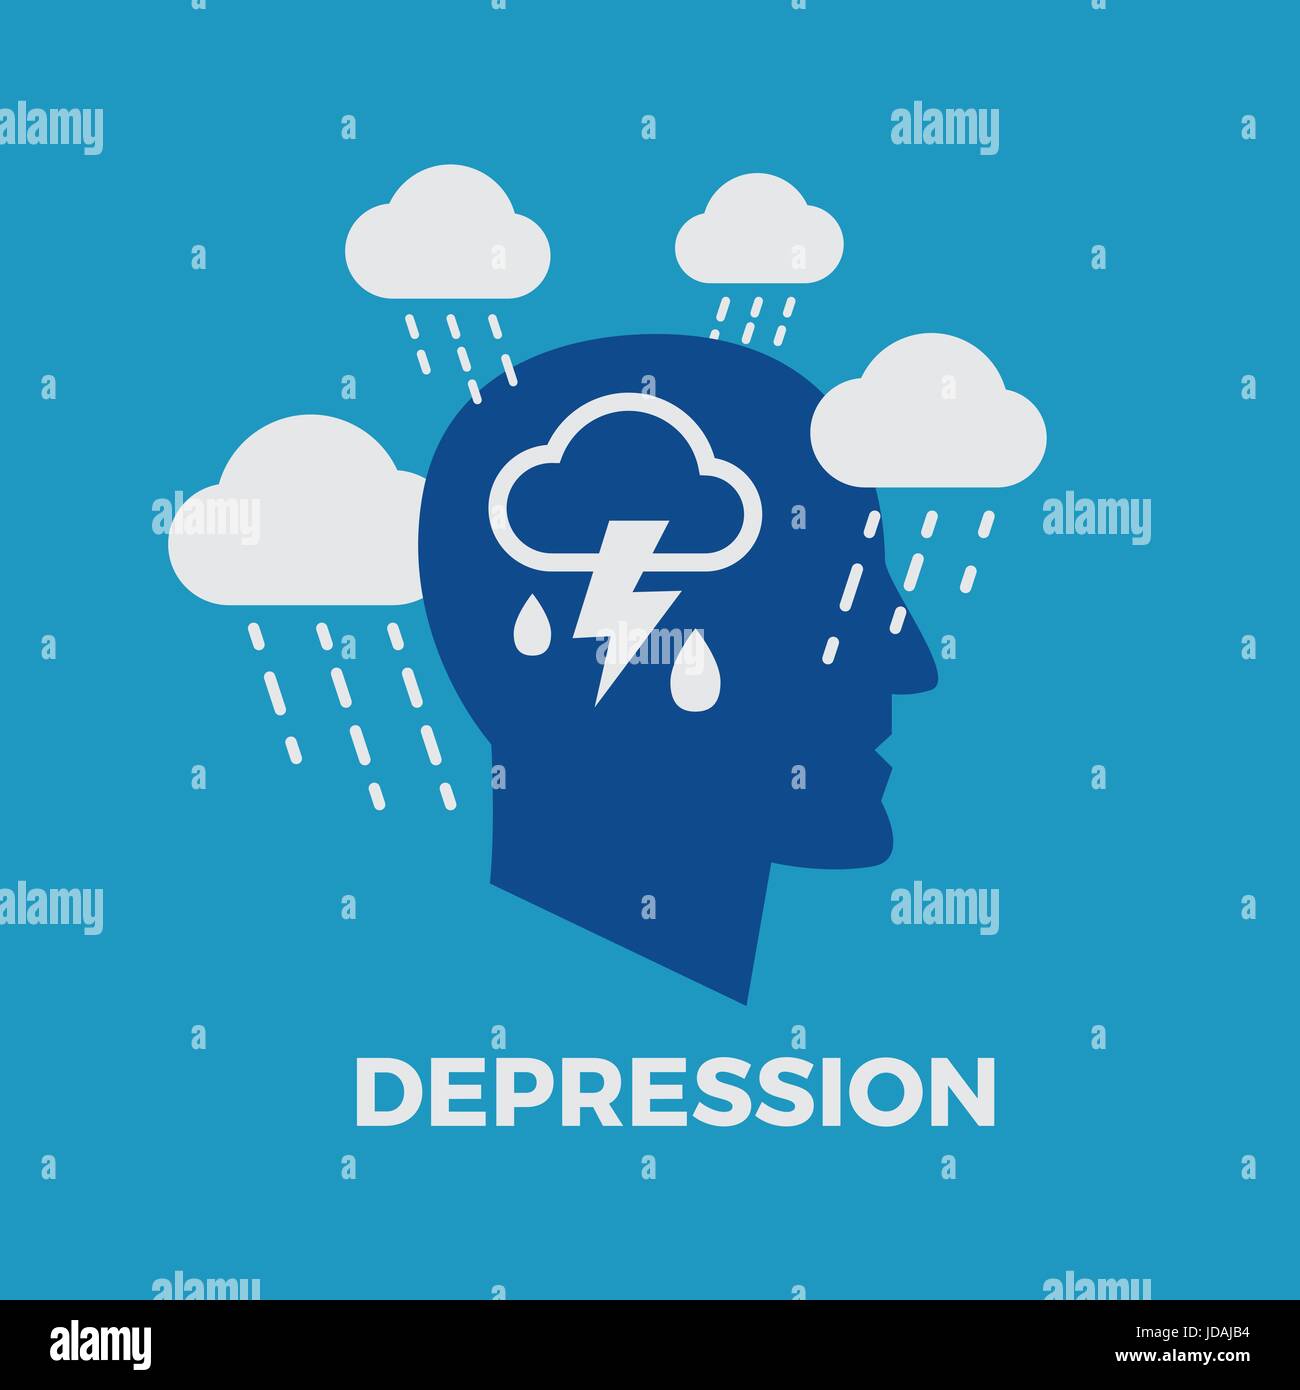 Depressed Man Stock Vector Images - Alamy